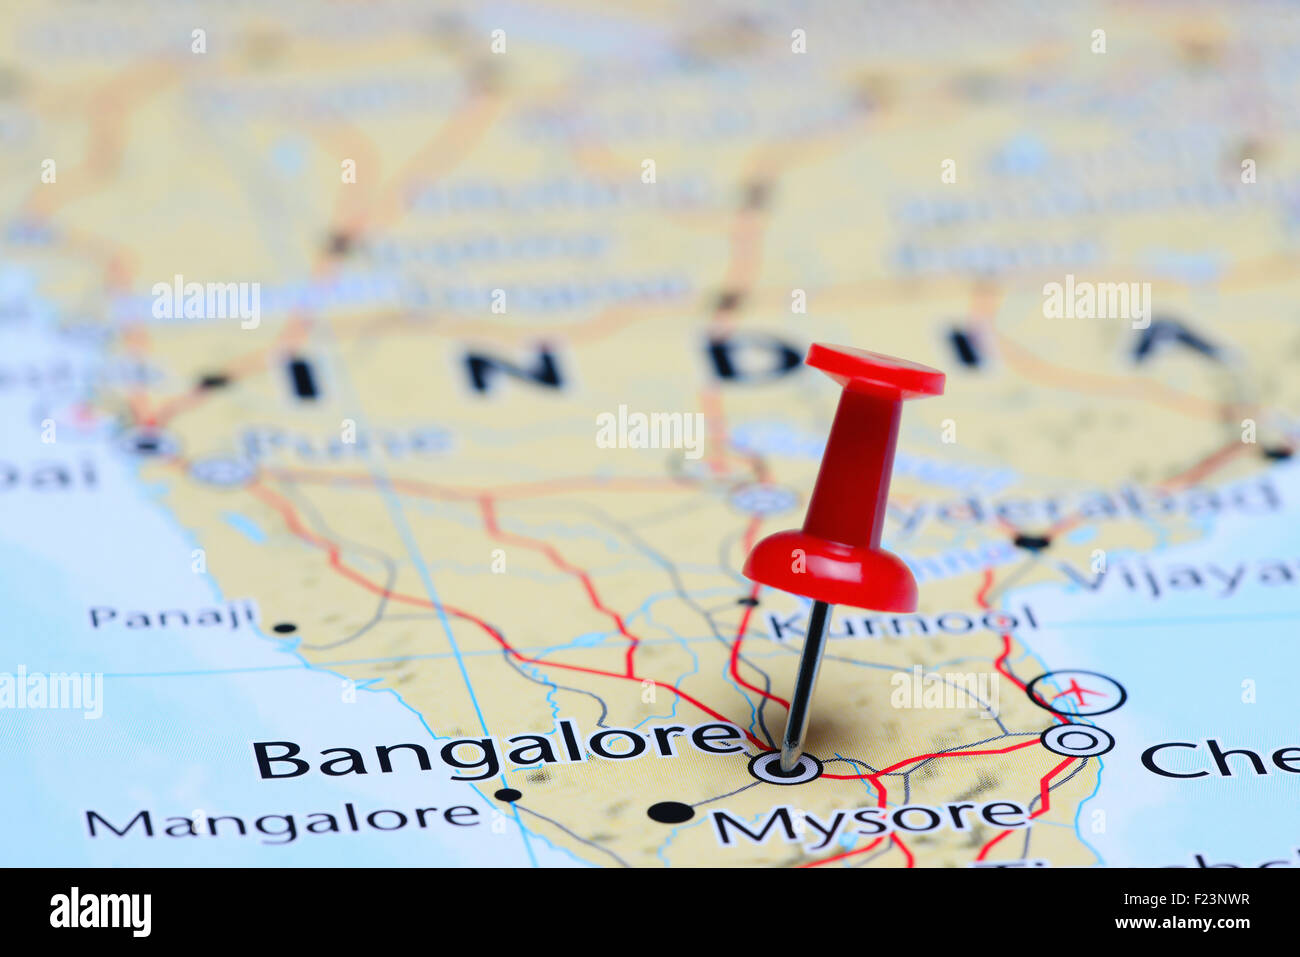 Bangalore pinned on a map of Asia Stock Photo